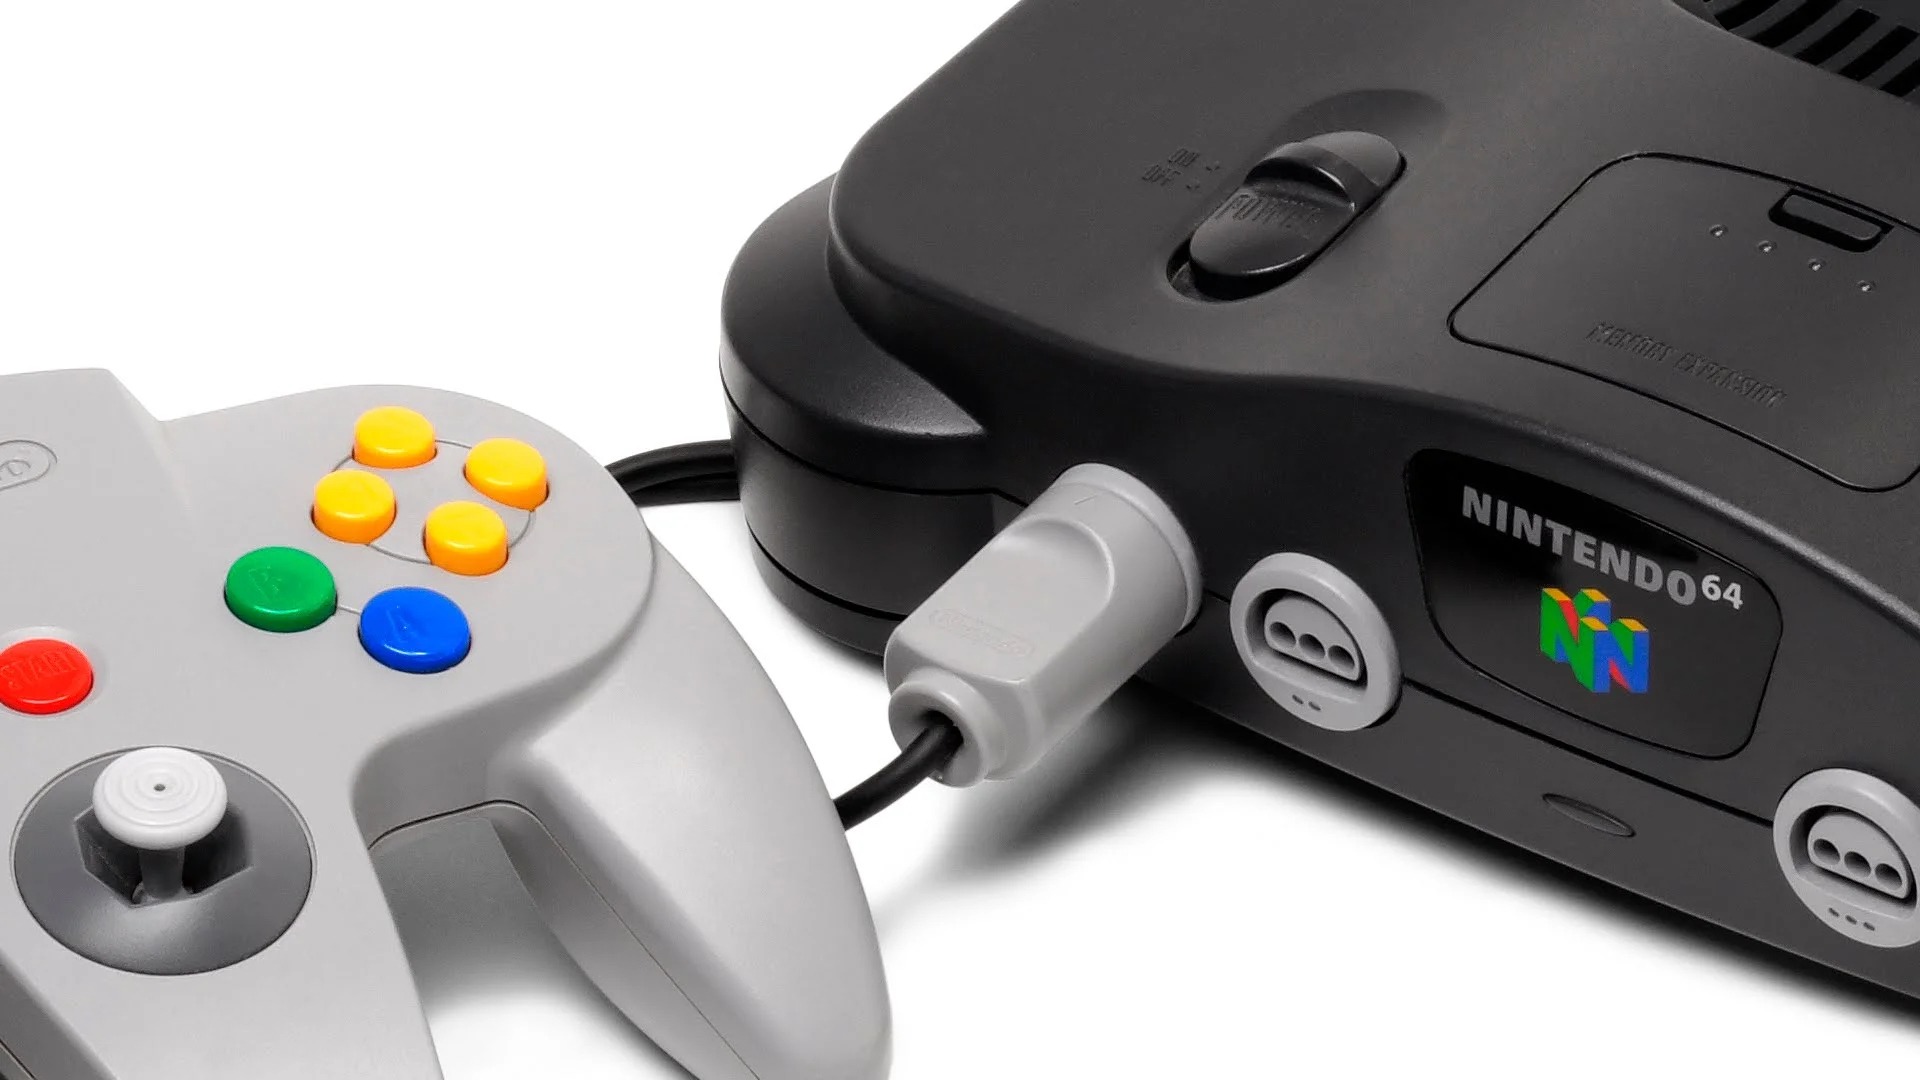 1920x1080 N64 Classic Mini: Hardware and games list potentially revealed in new leak | Trusted Reviews